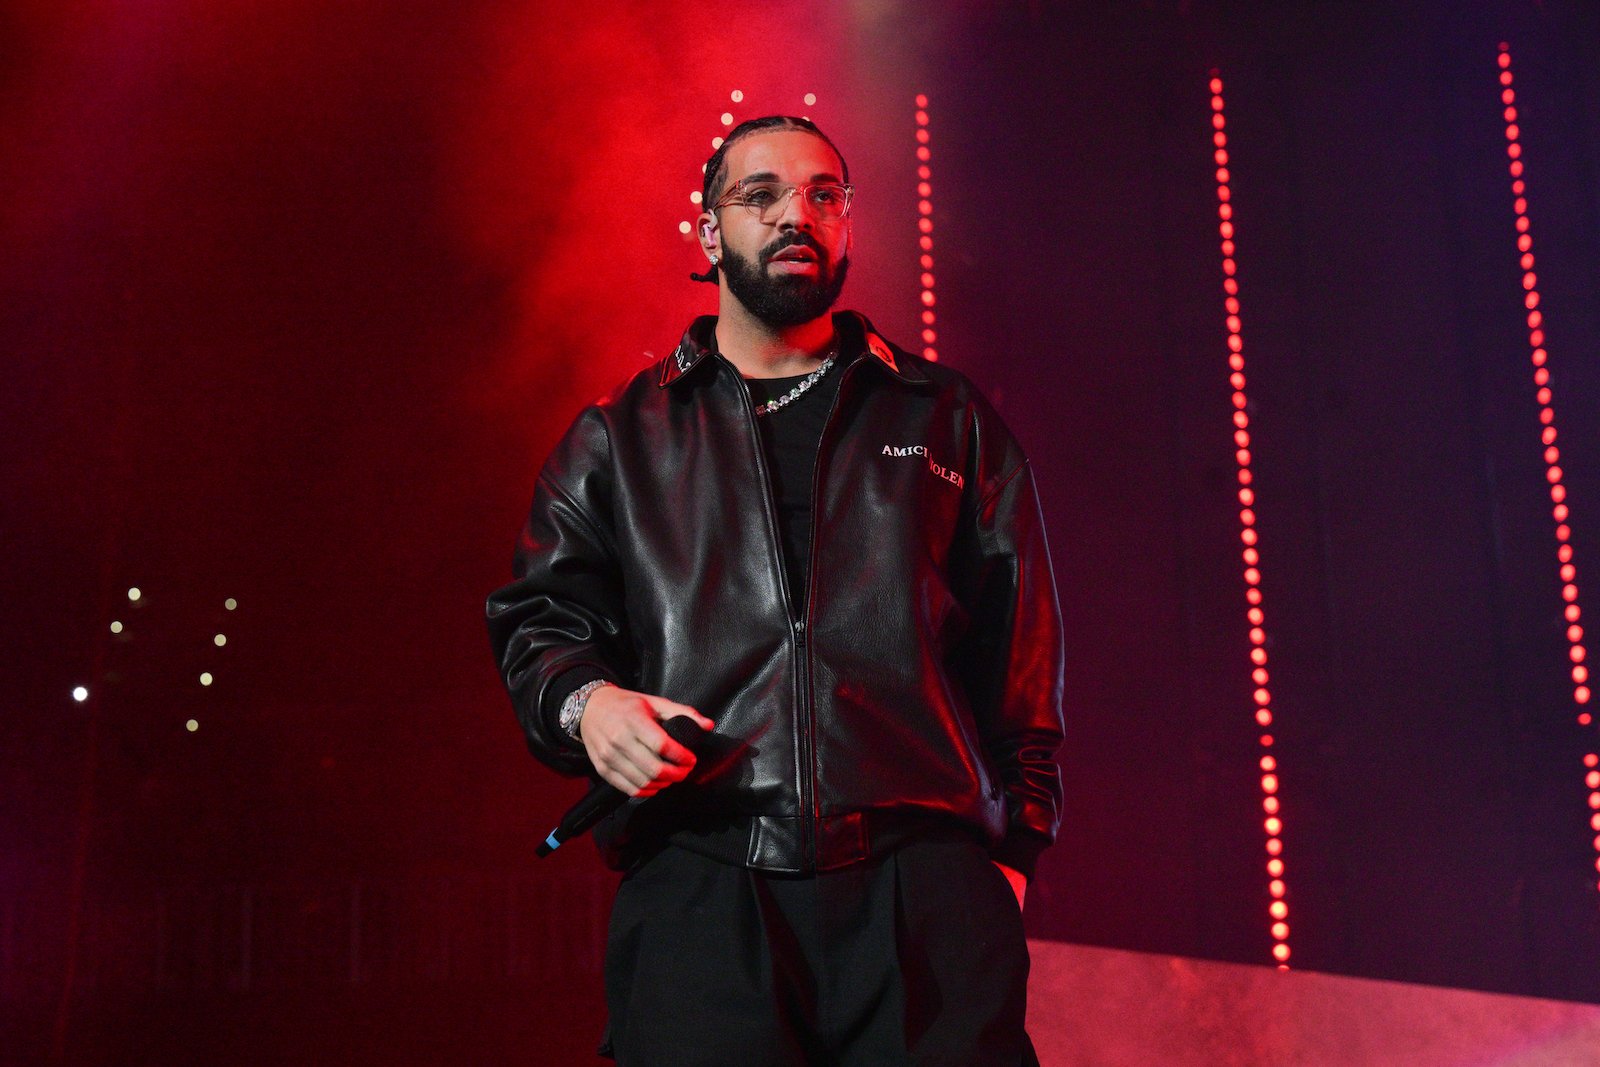 Drake, who was performing at the Apollo theater when a fan fell from the balcony, on stage wearing a black leather jacket